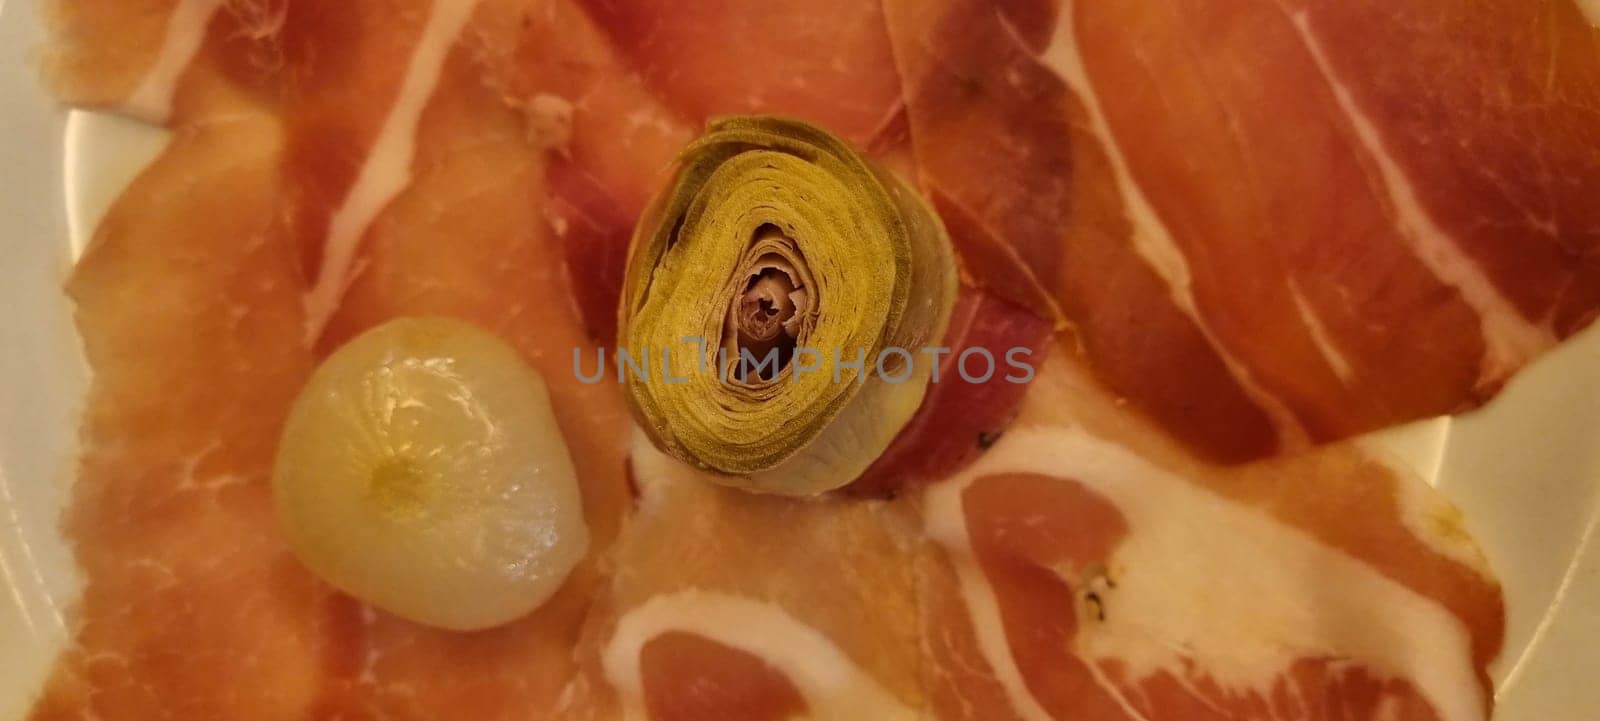 Gourmet cured meat and artichoke platter close-up by FlightVideo